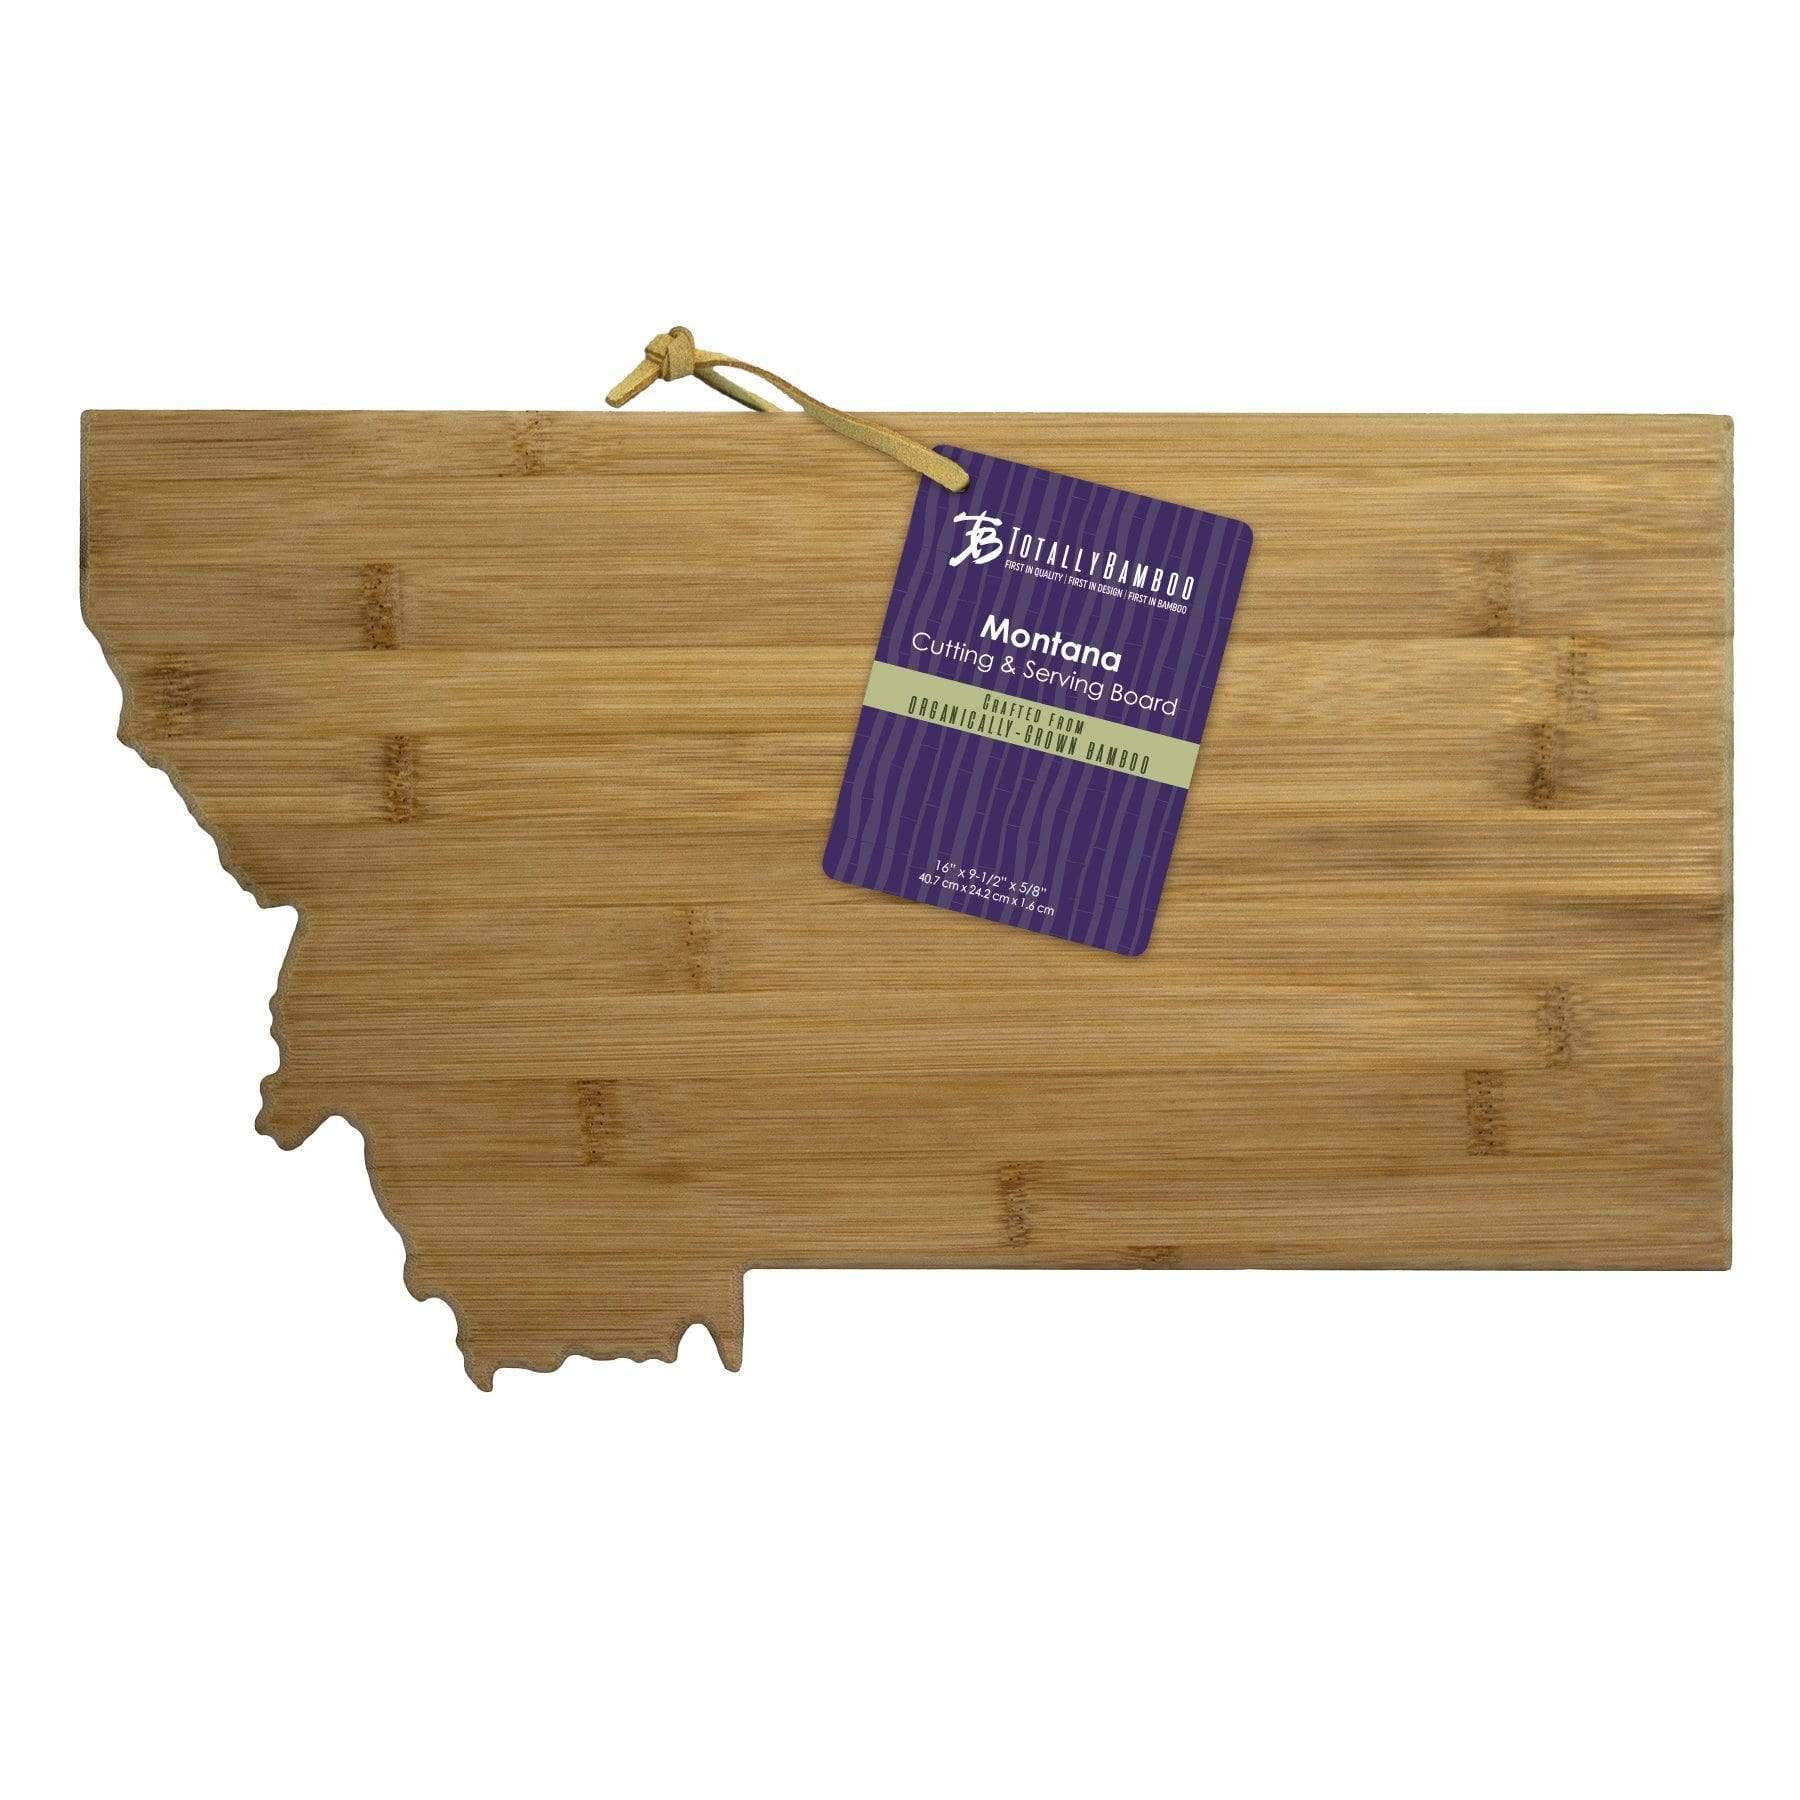 Totally Bamboo Montana State Shaped Bamboo Serving and Cutting Board